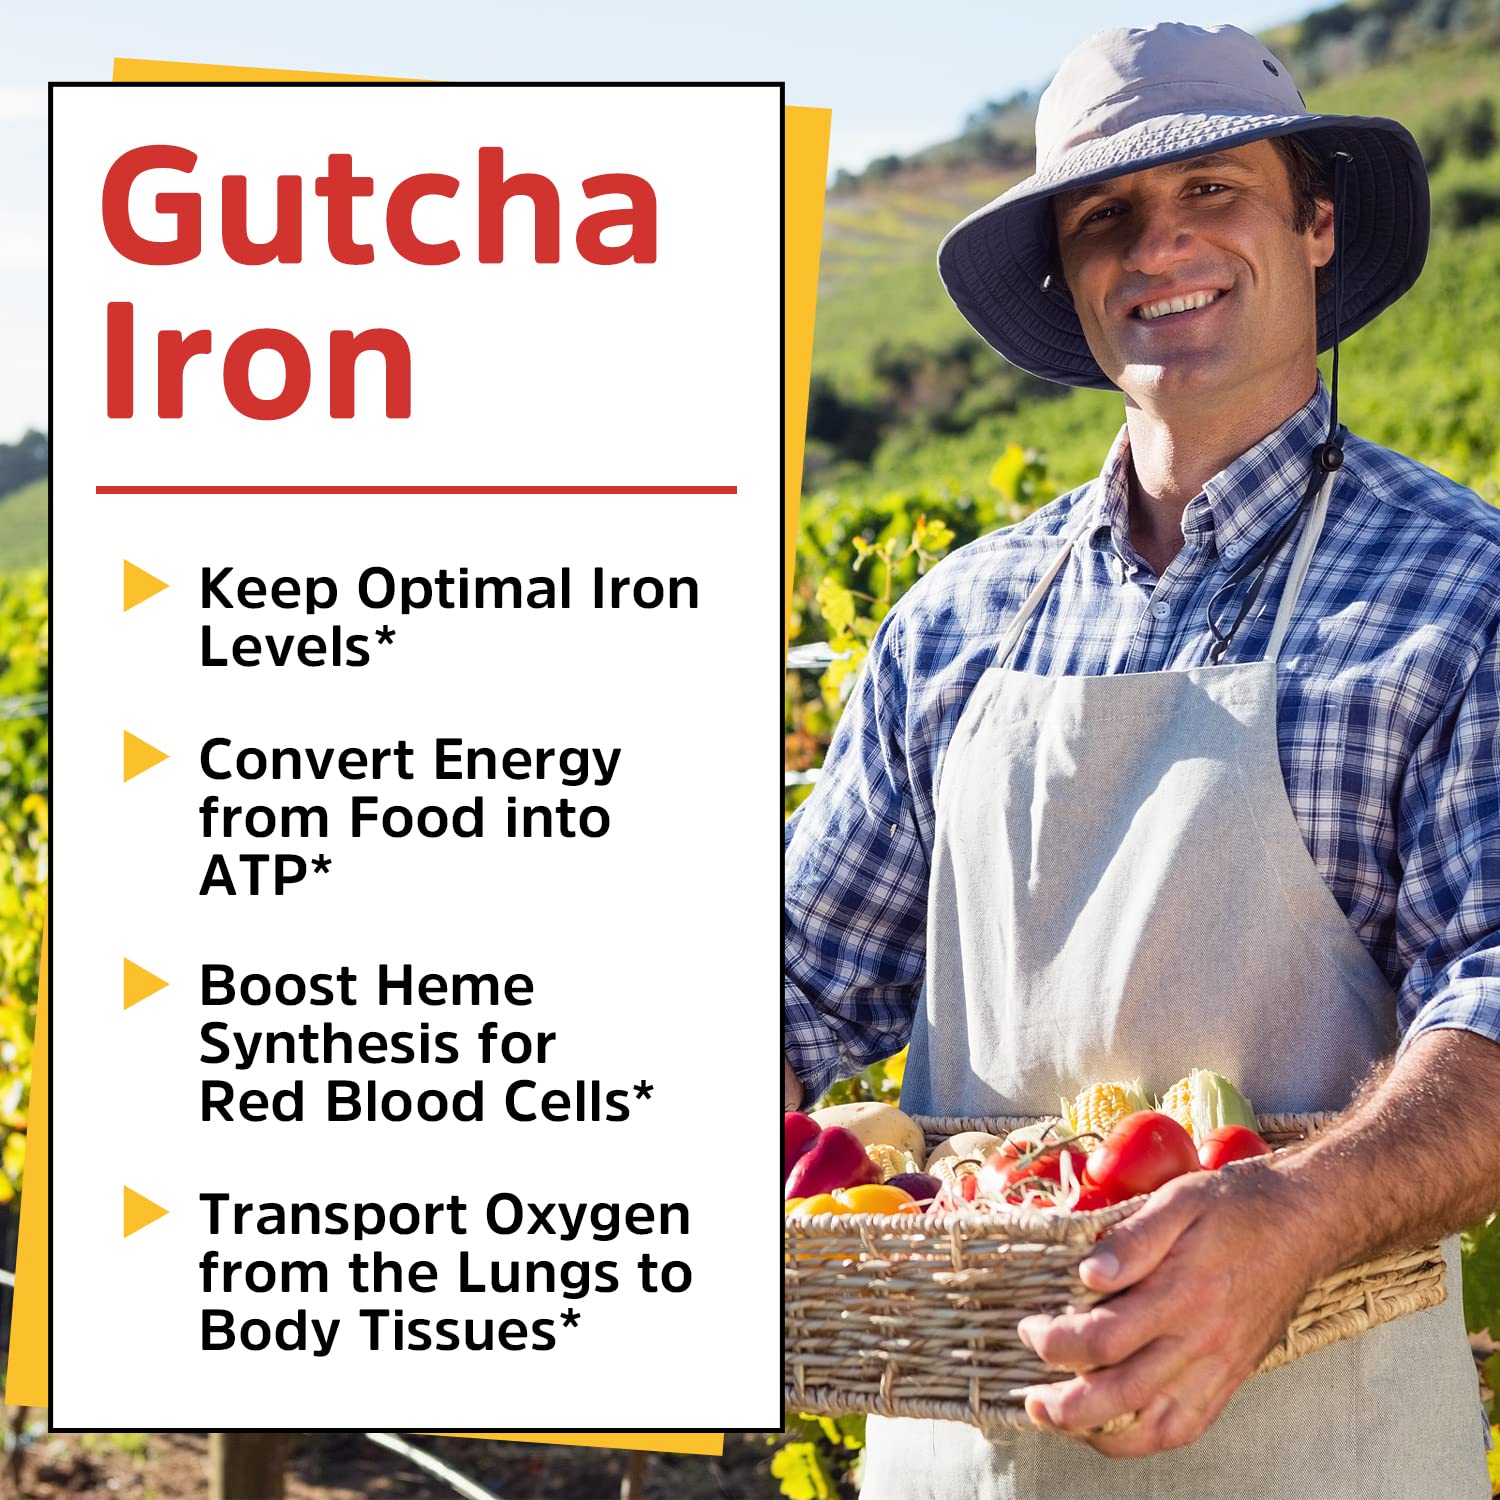 Gutcha Iron Supplement, 65 mg, Carbonyl Iron Plus Vitamin C, Energy & Blood Support for Women & Men, Better Absorption, Gentle on The Stomach, No Nausea, No Constipation, Vegan, Non-GMO, 60 Ct